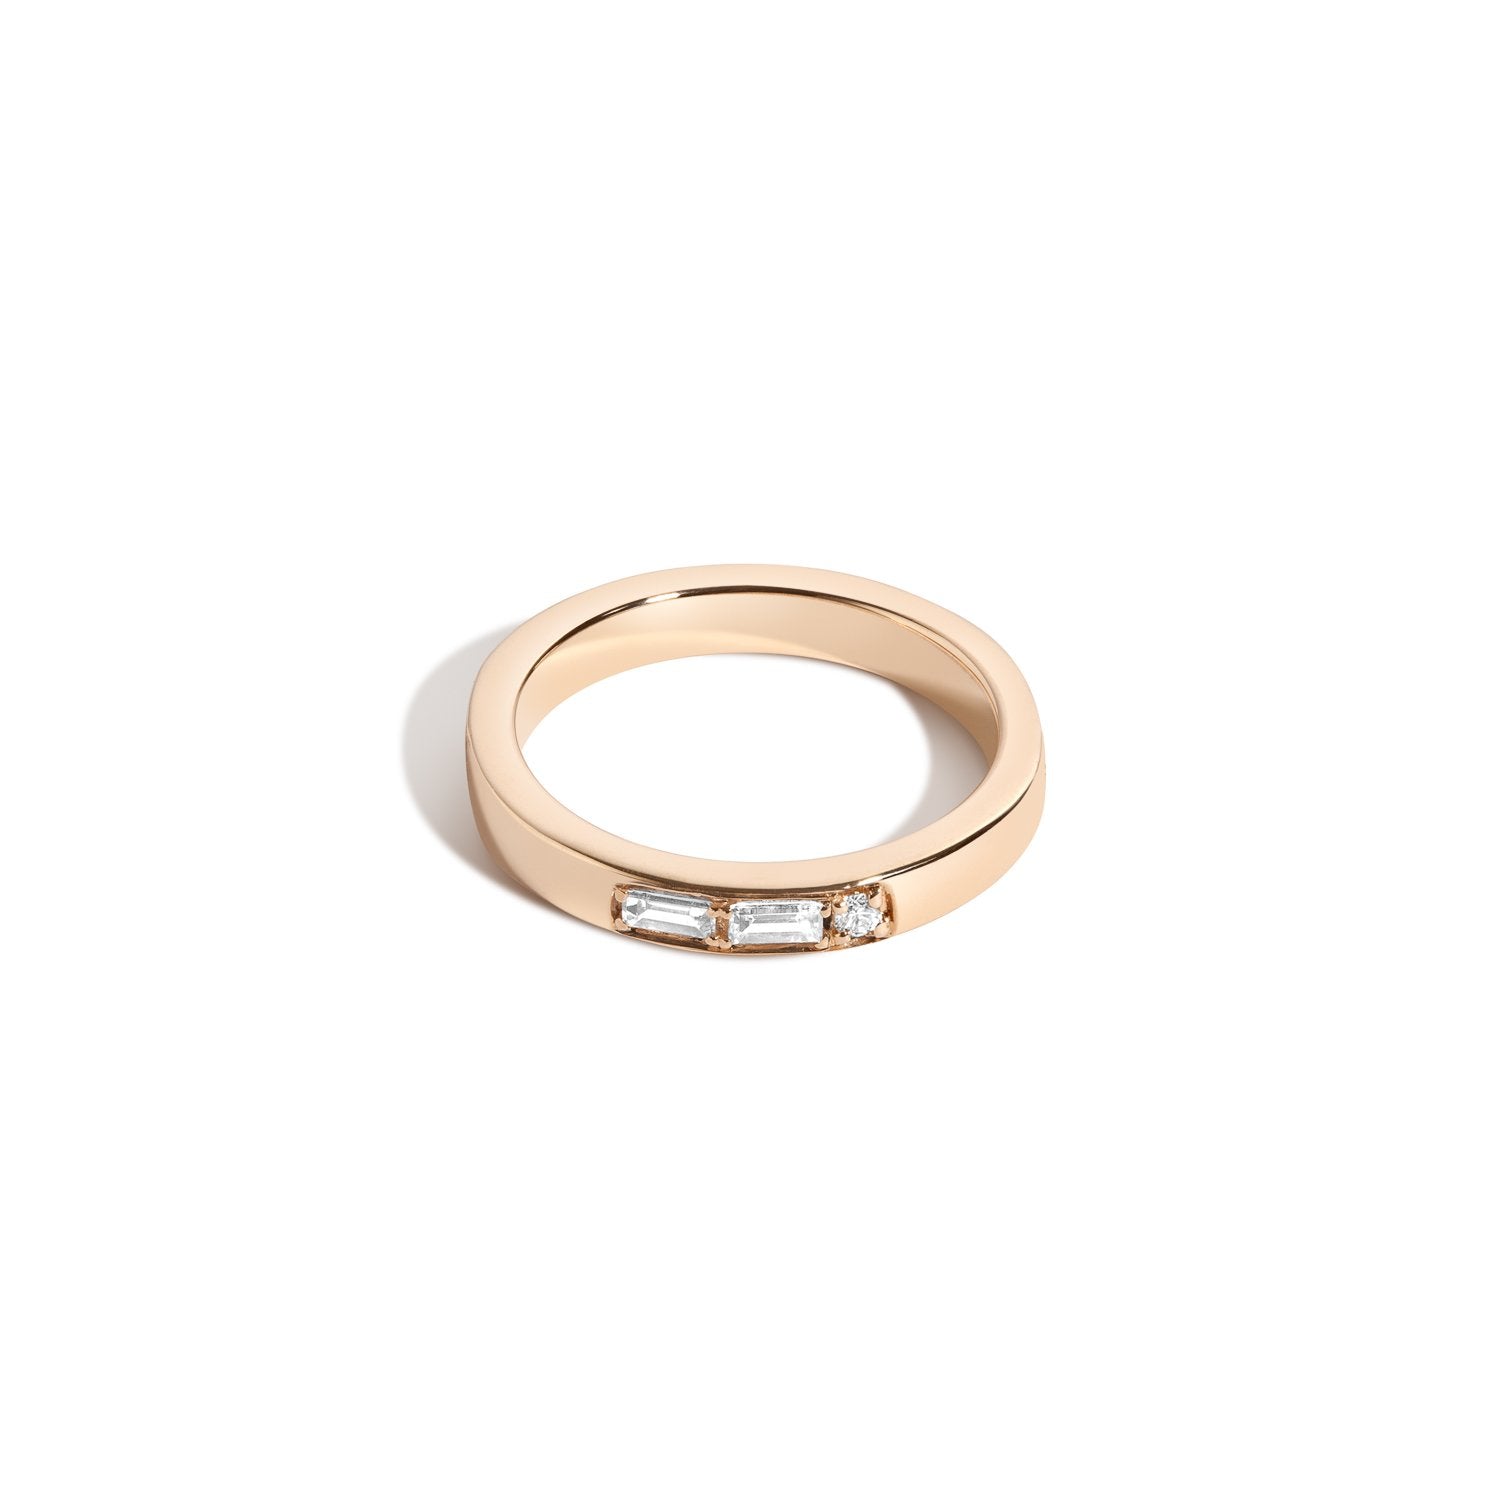 Shahla Karimi Jewelry Morse Code Series Ring 14K Yellow Gold - Letter "G"